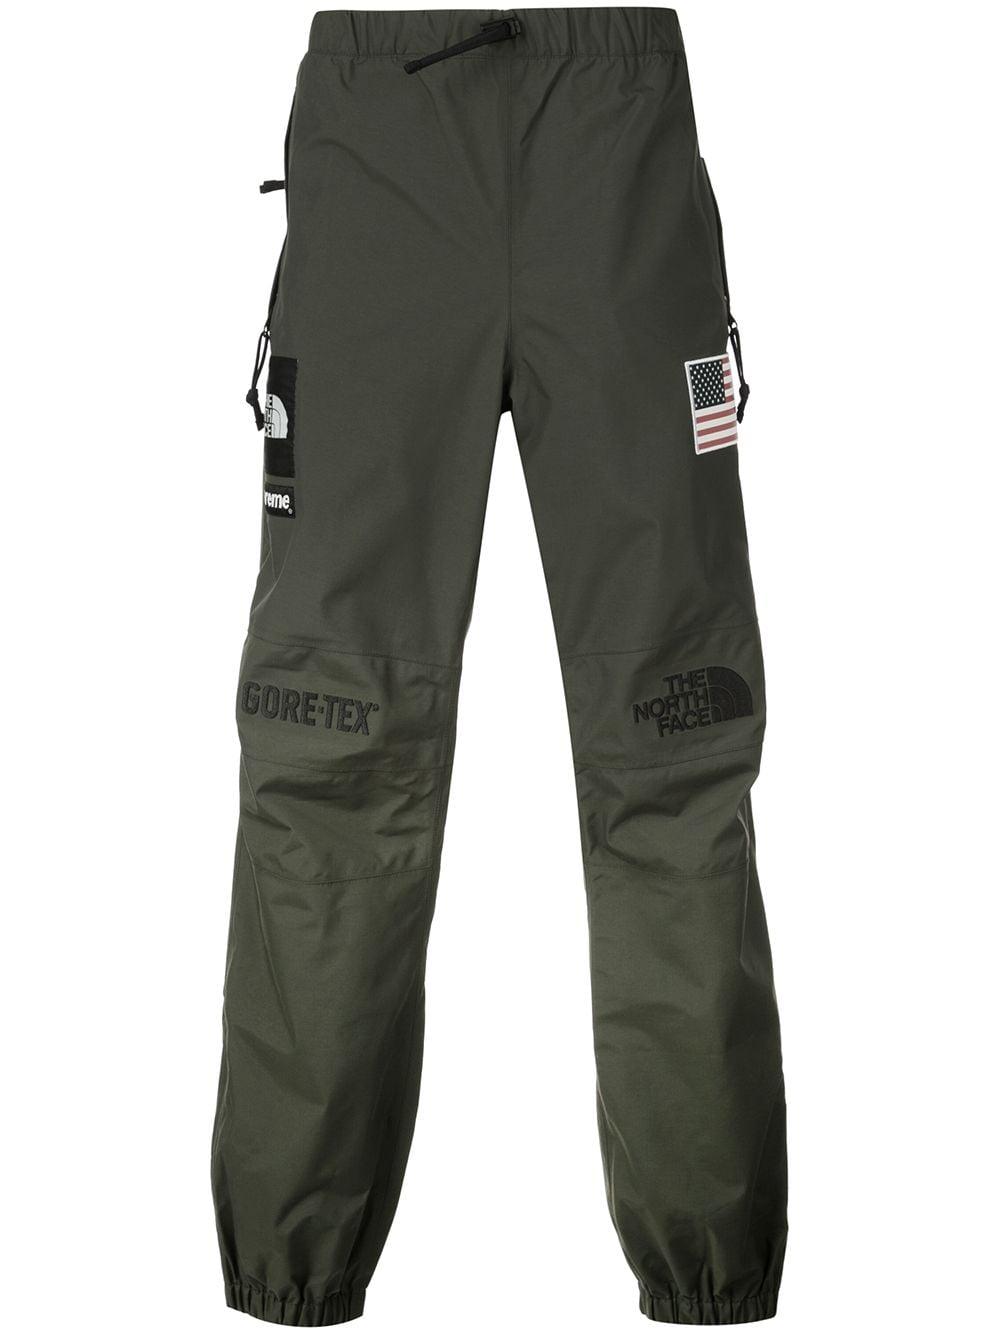 Supreme X The North Face Expedition Trousers in Green for Men - Lyst